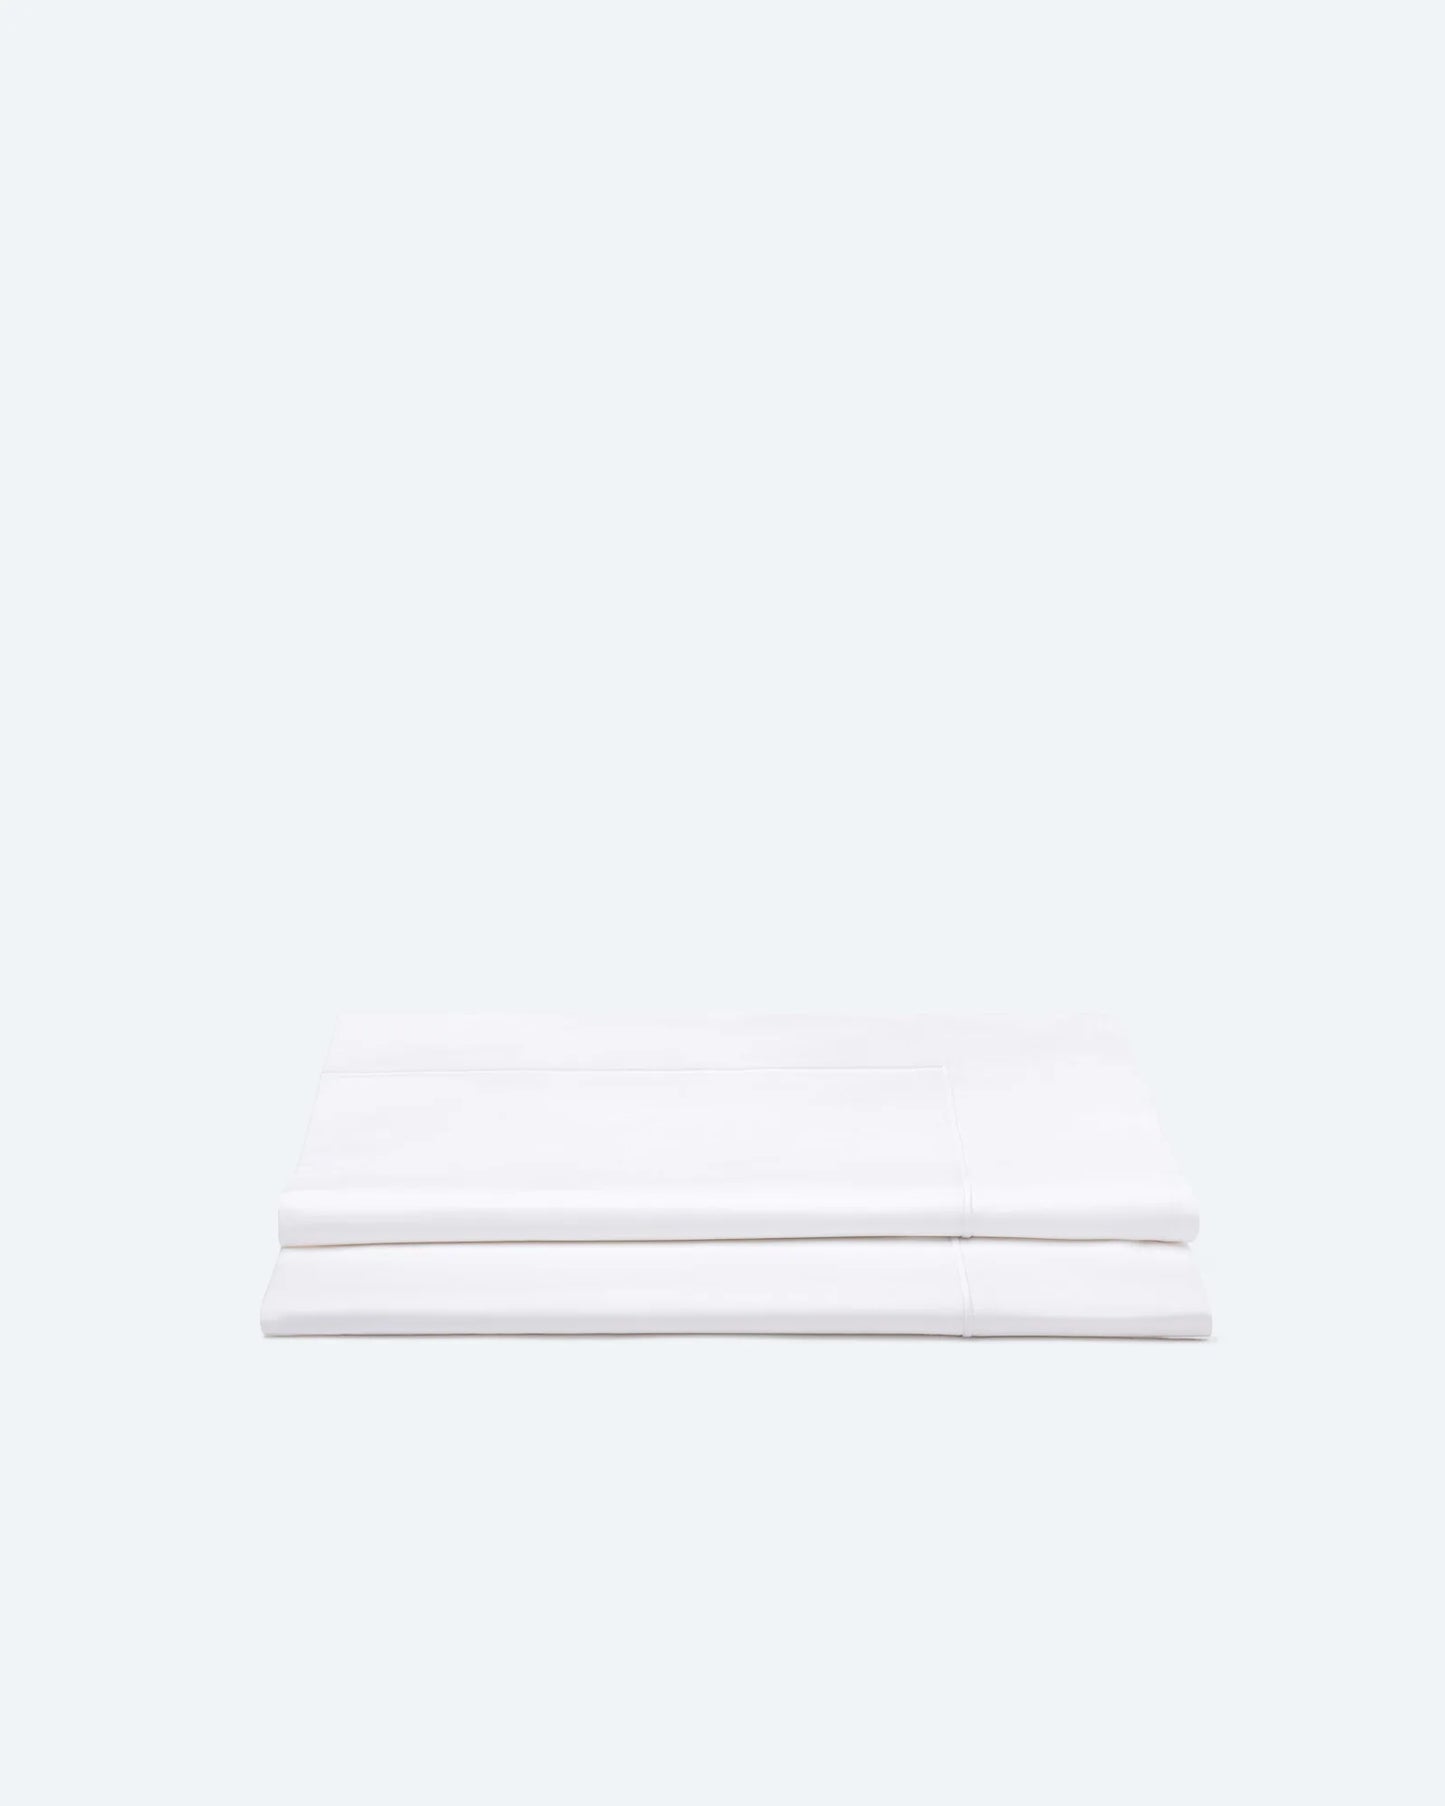 Bedding Set with Duvet Cover and Sheet Crisp White Cotton Percale